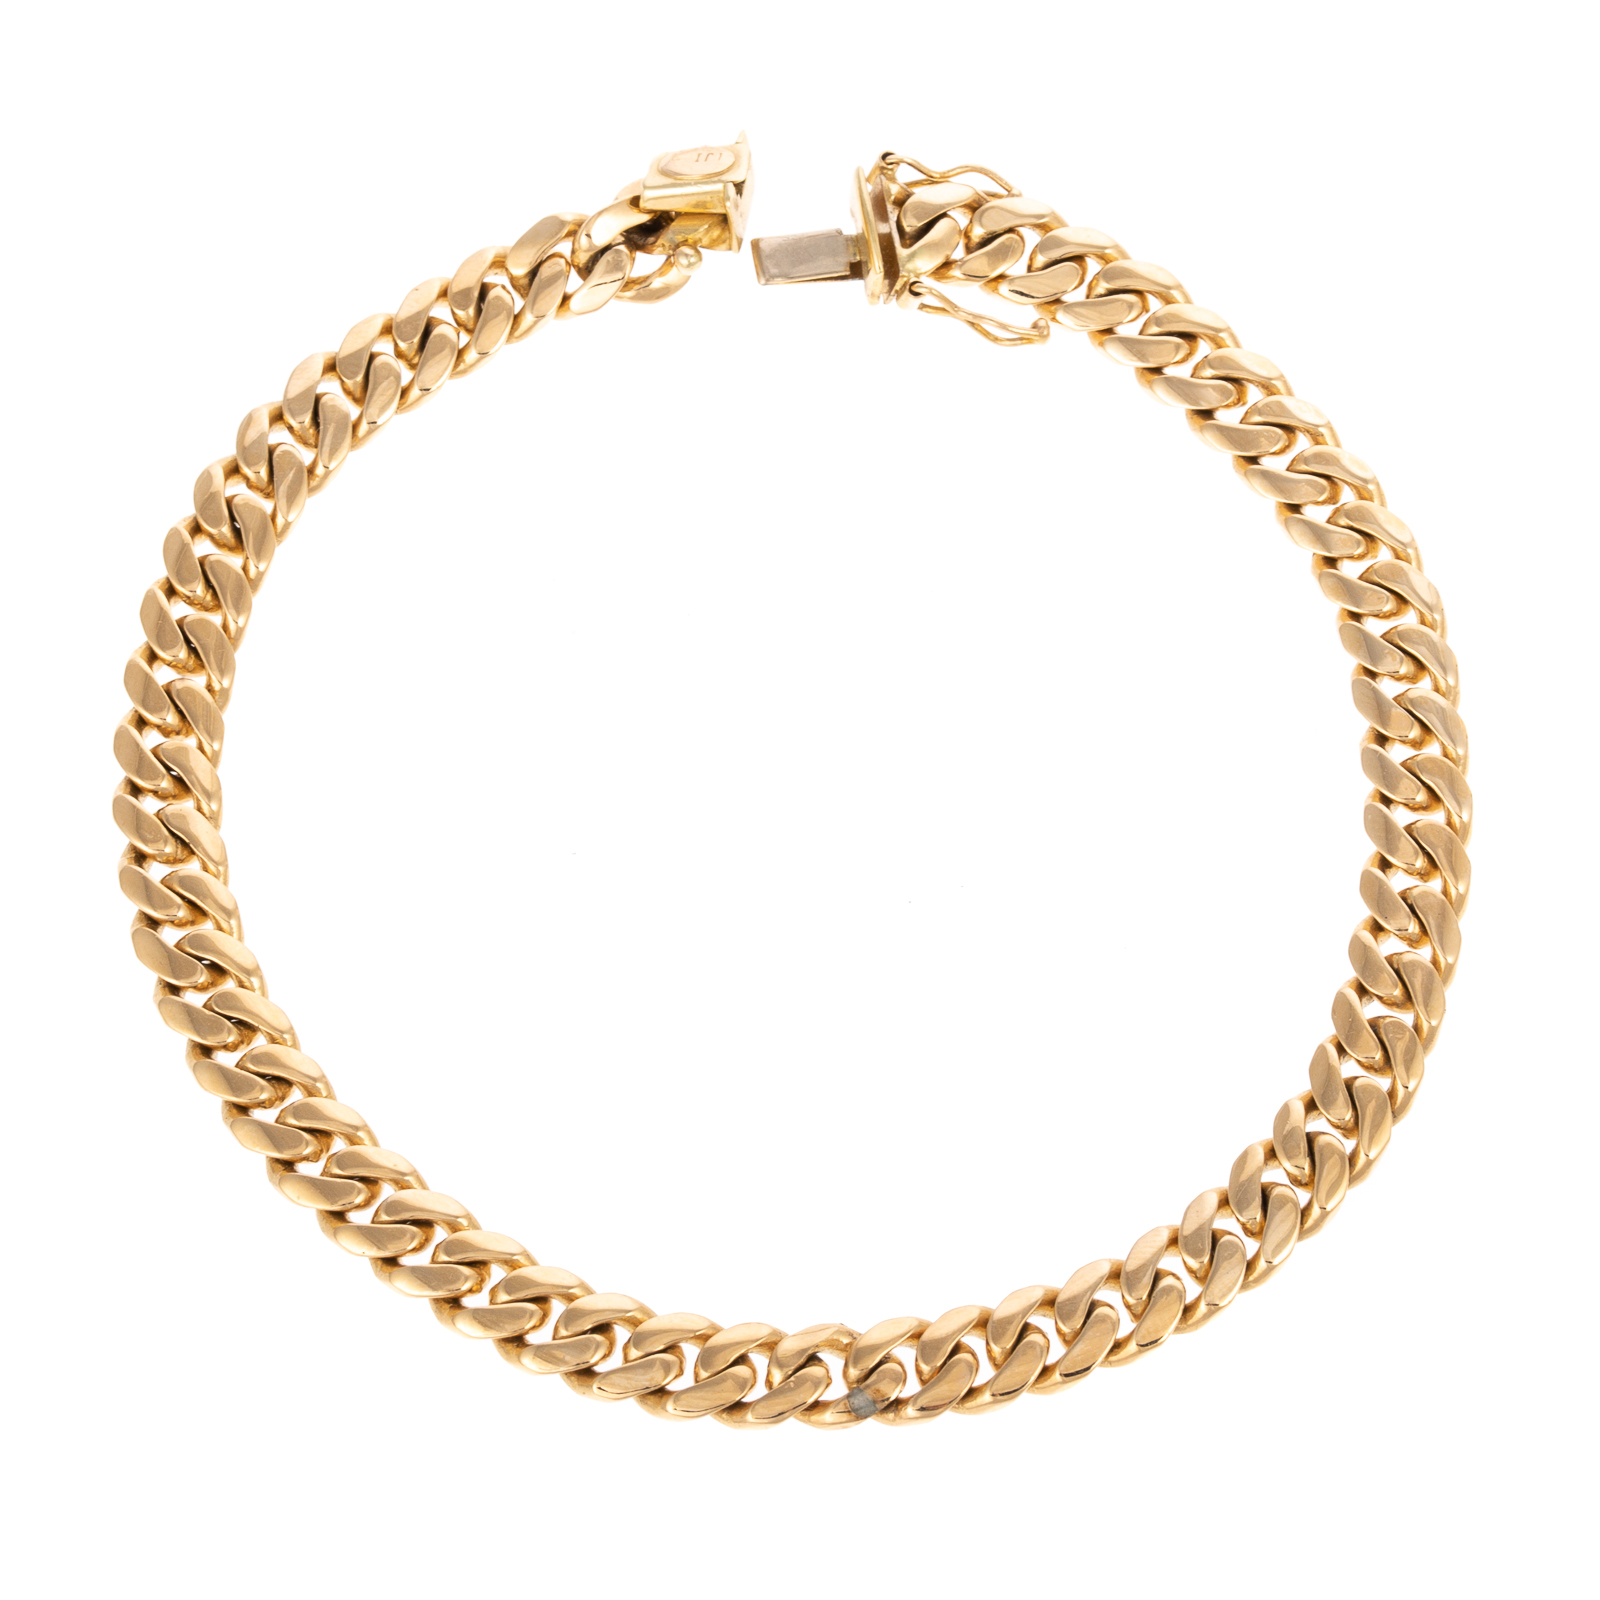 A 14K YELLOW GOLD CURB LINK ANKLET 338d83